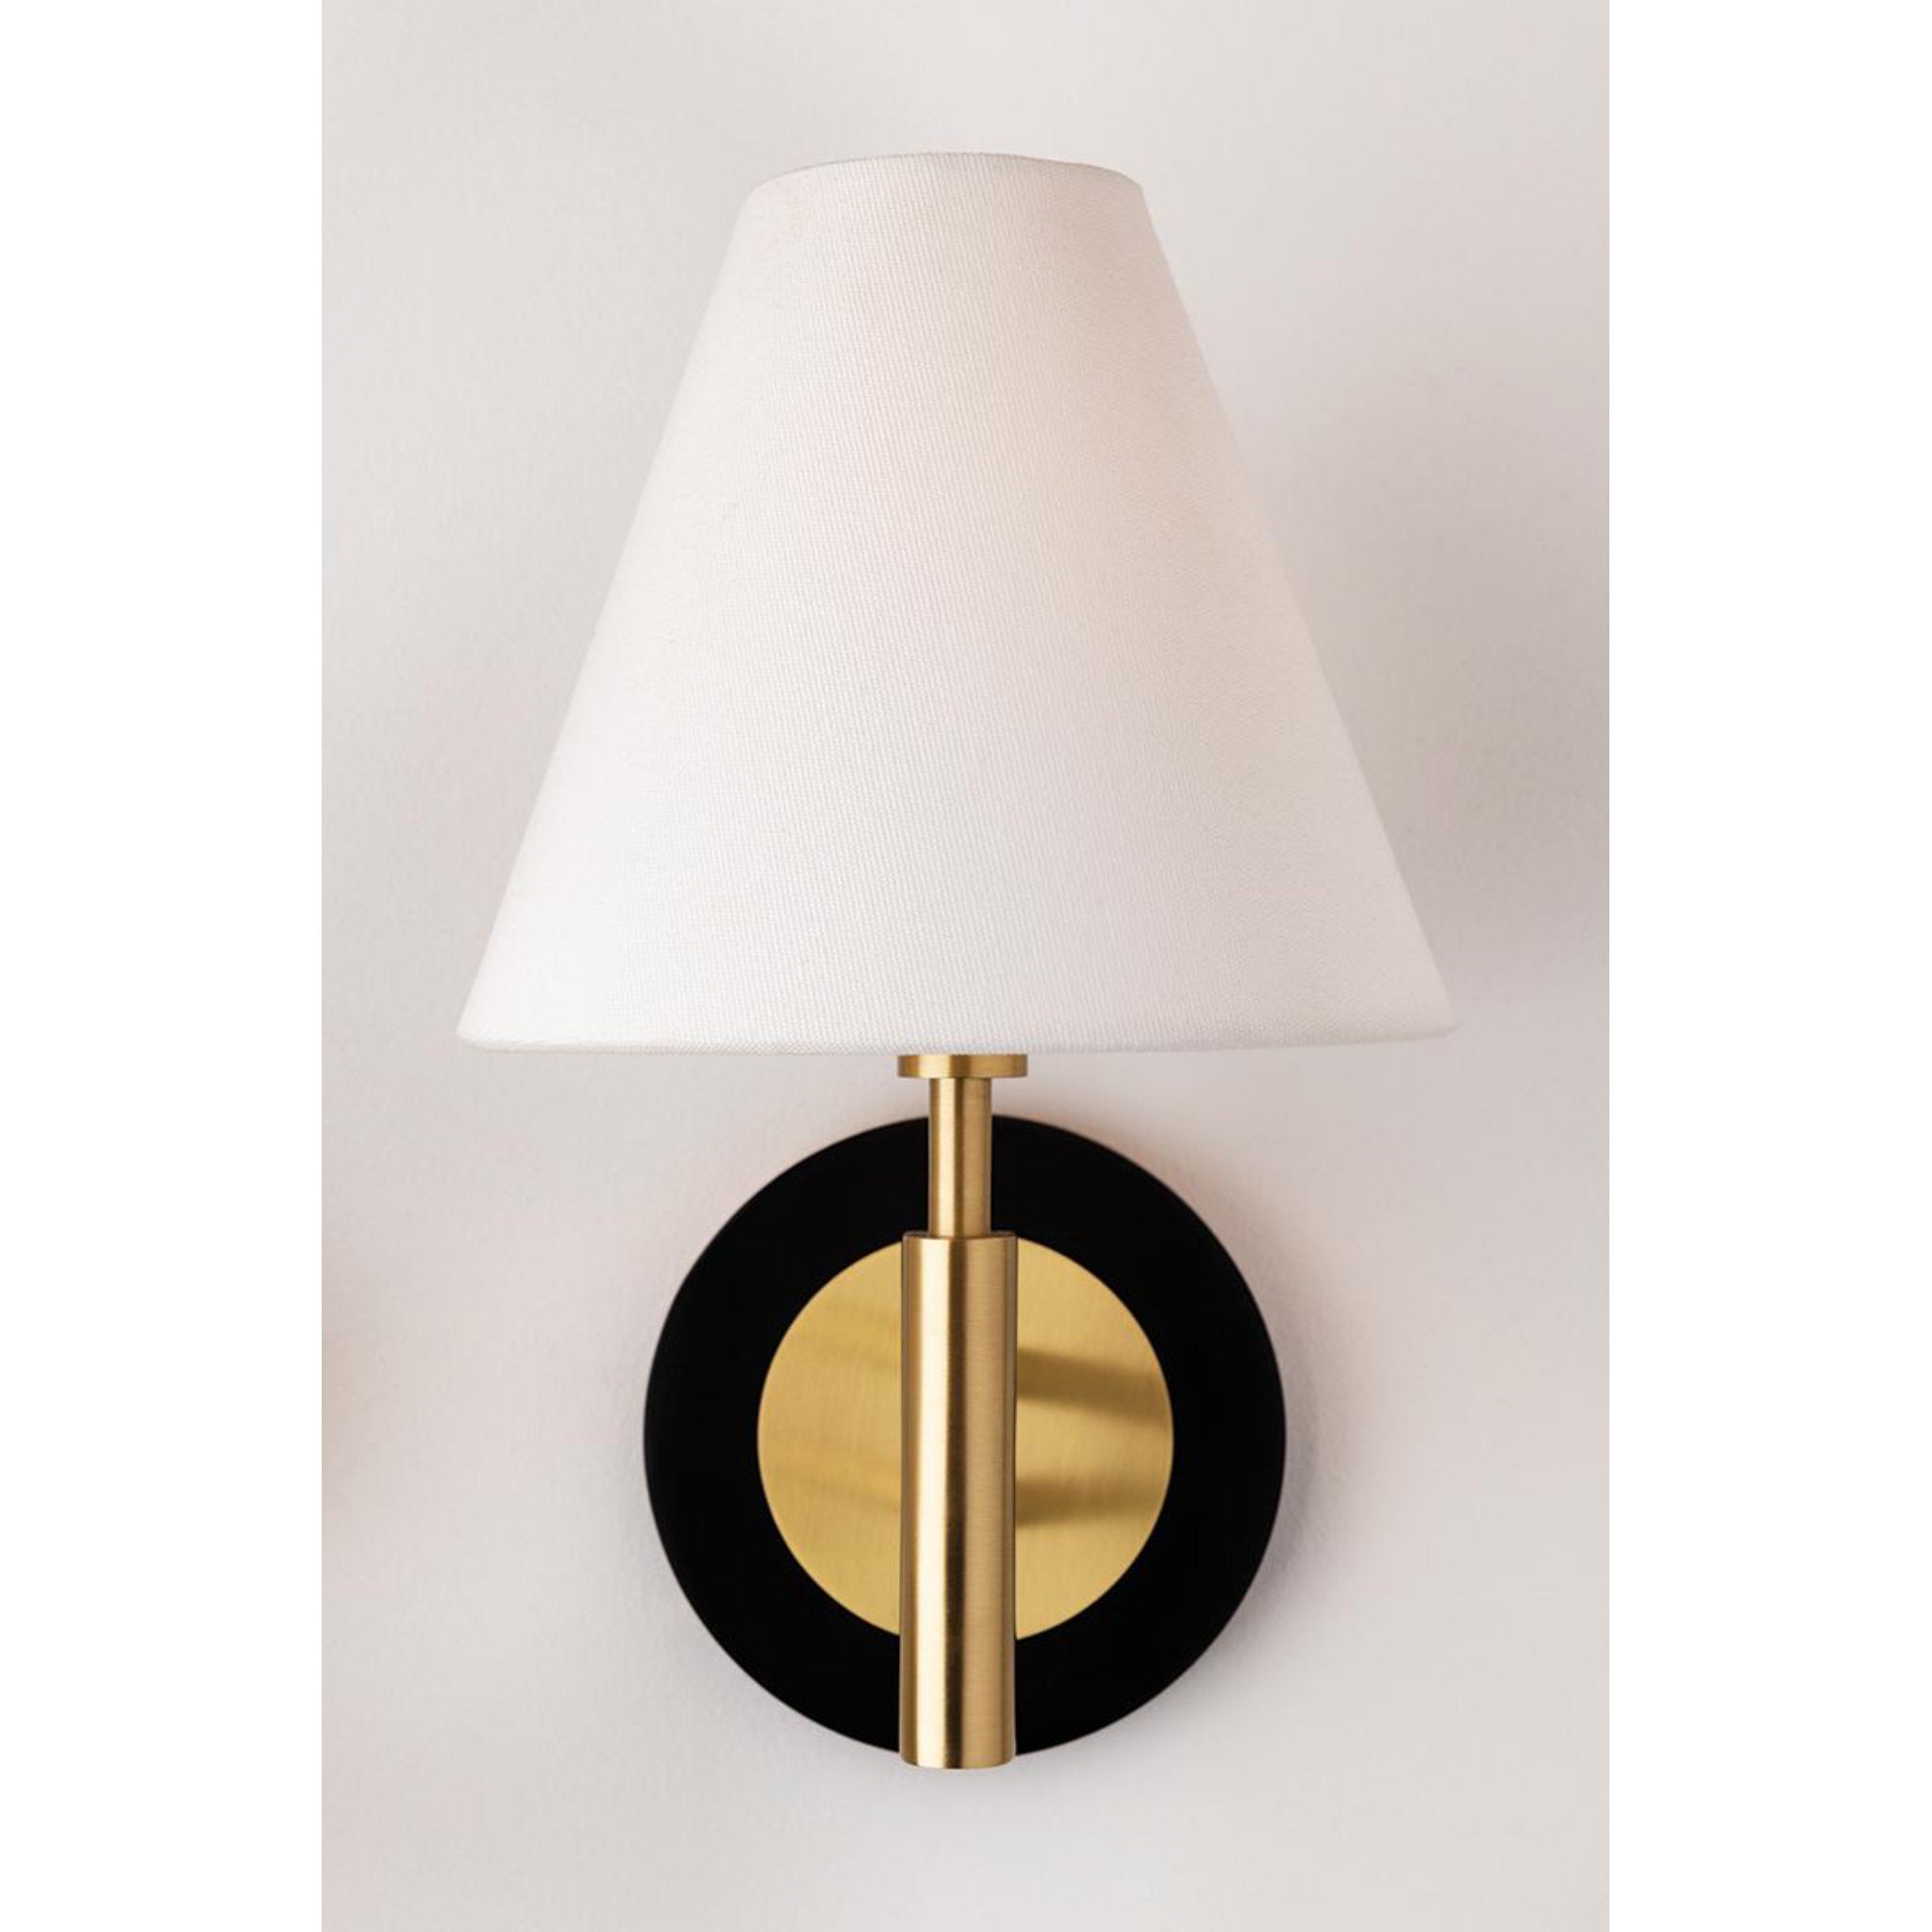 Robbie 1-Light Wall Sconce in Aged Brass/Soft Off White